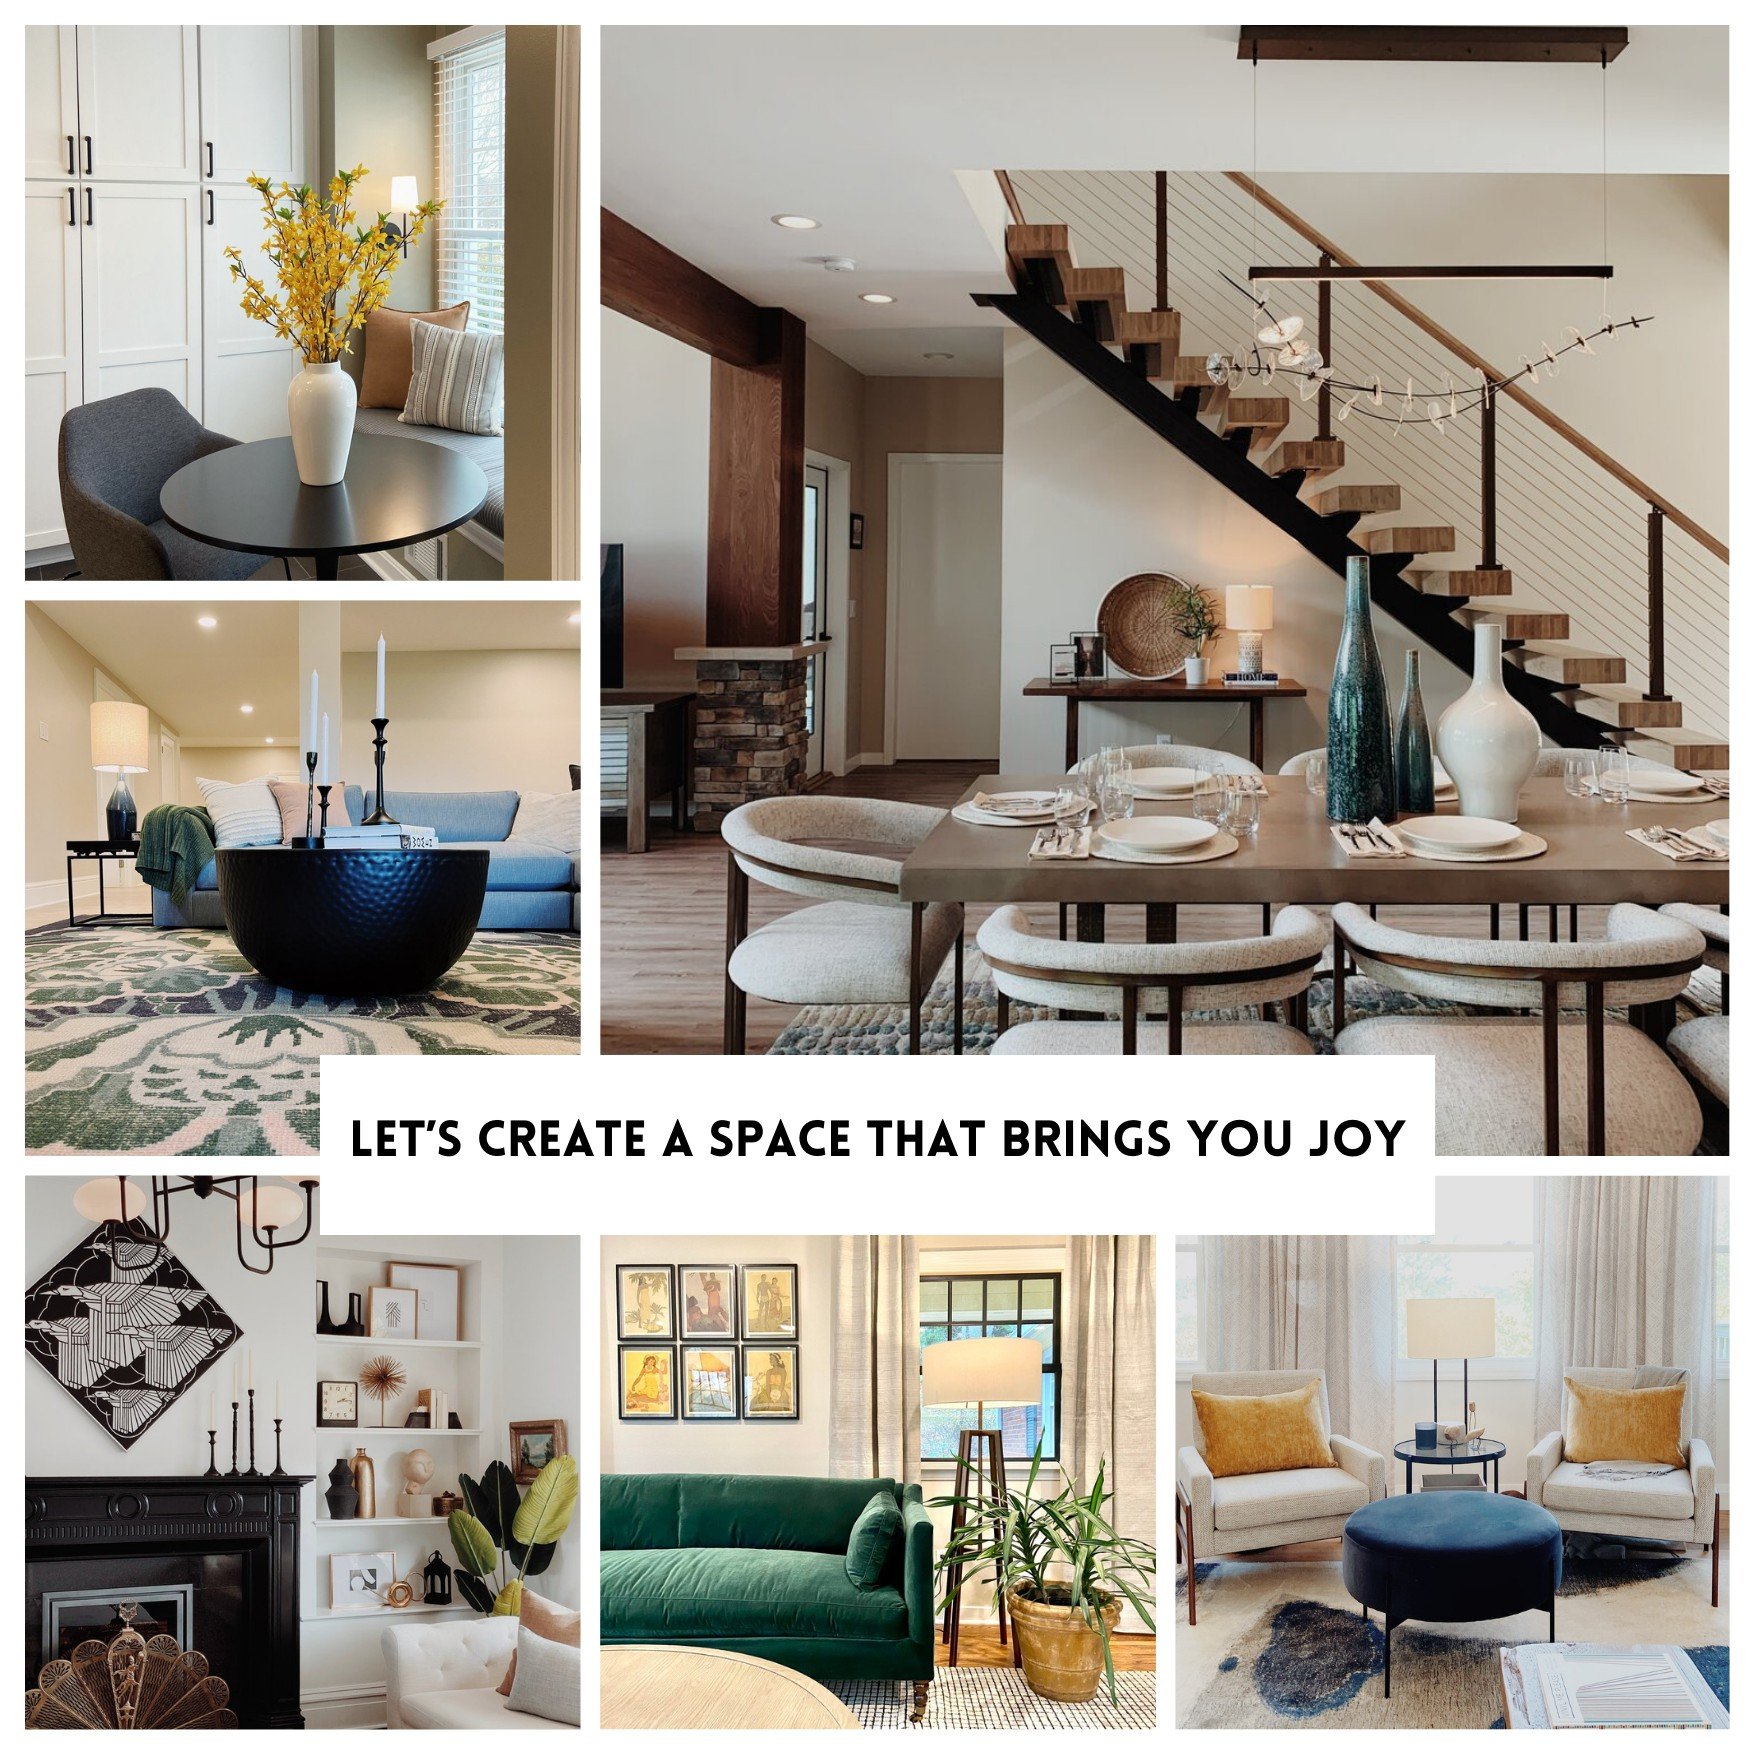 Does your home make you happy? Does it need some help to become your favorite place? Let us help you add personality and character to your home. 
.
.
.
#designfive #pittsburgh #pittsburghinteriordesigner #pittsburghinteriors #interiordesign #design #